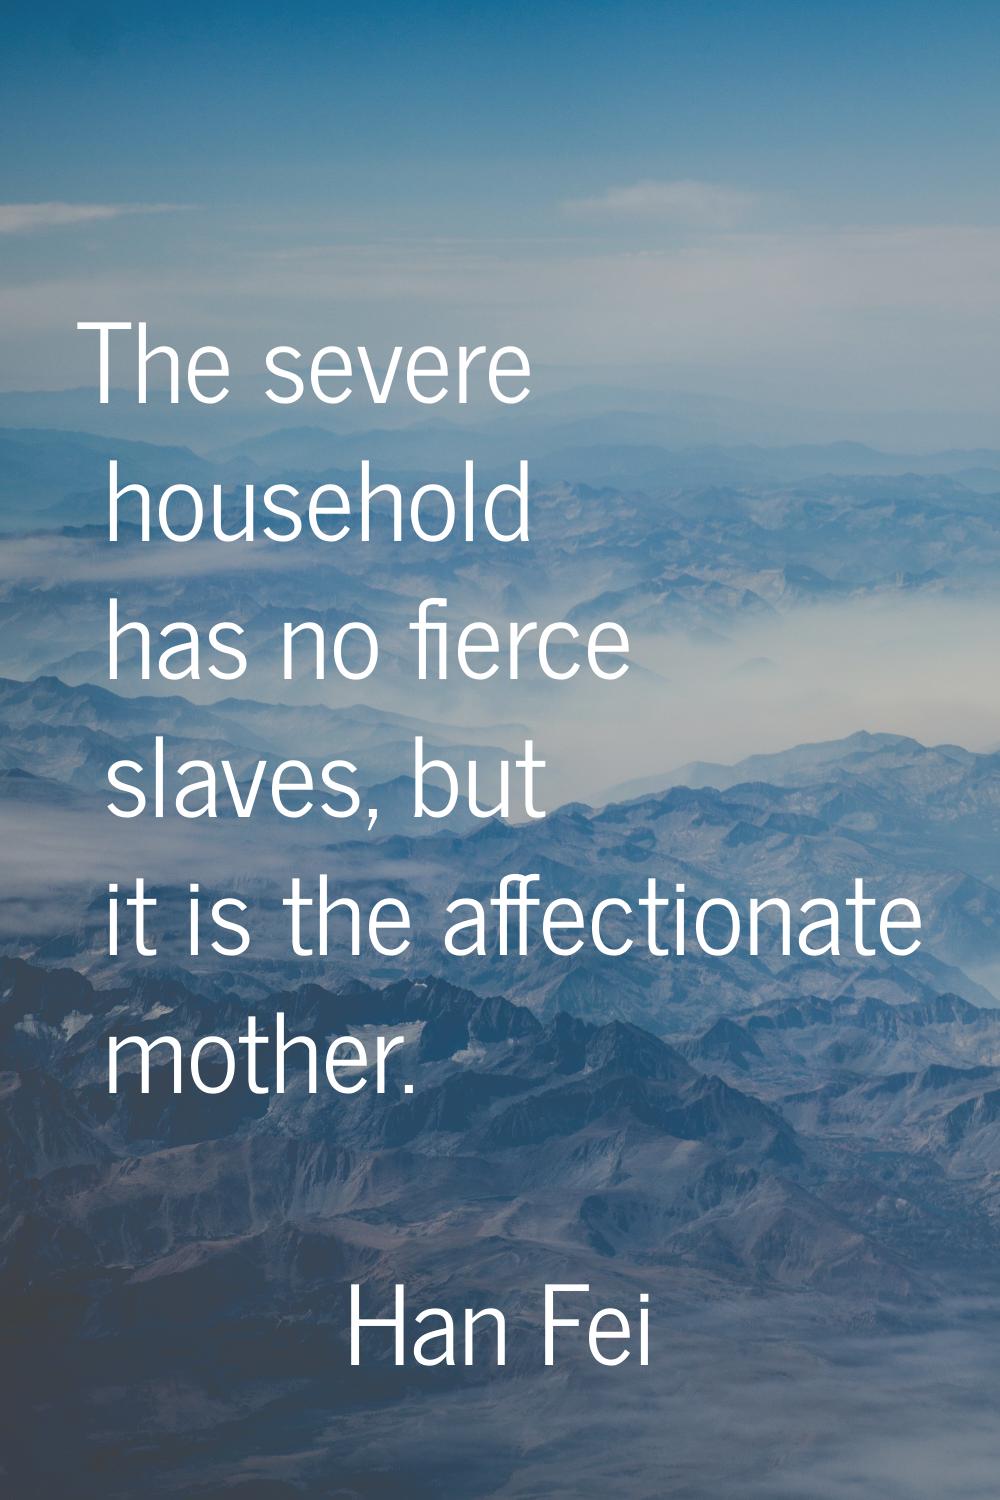 The severe household has no fierce slaves, but it is the affectionate mother.